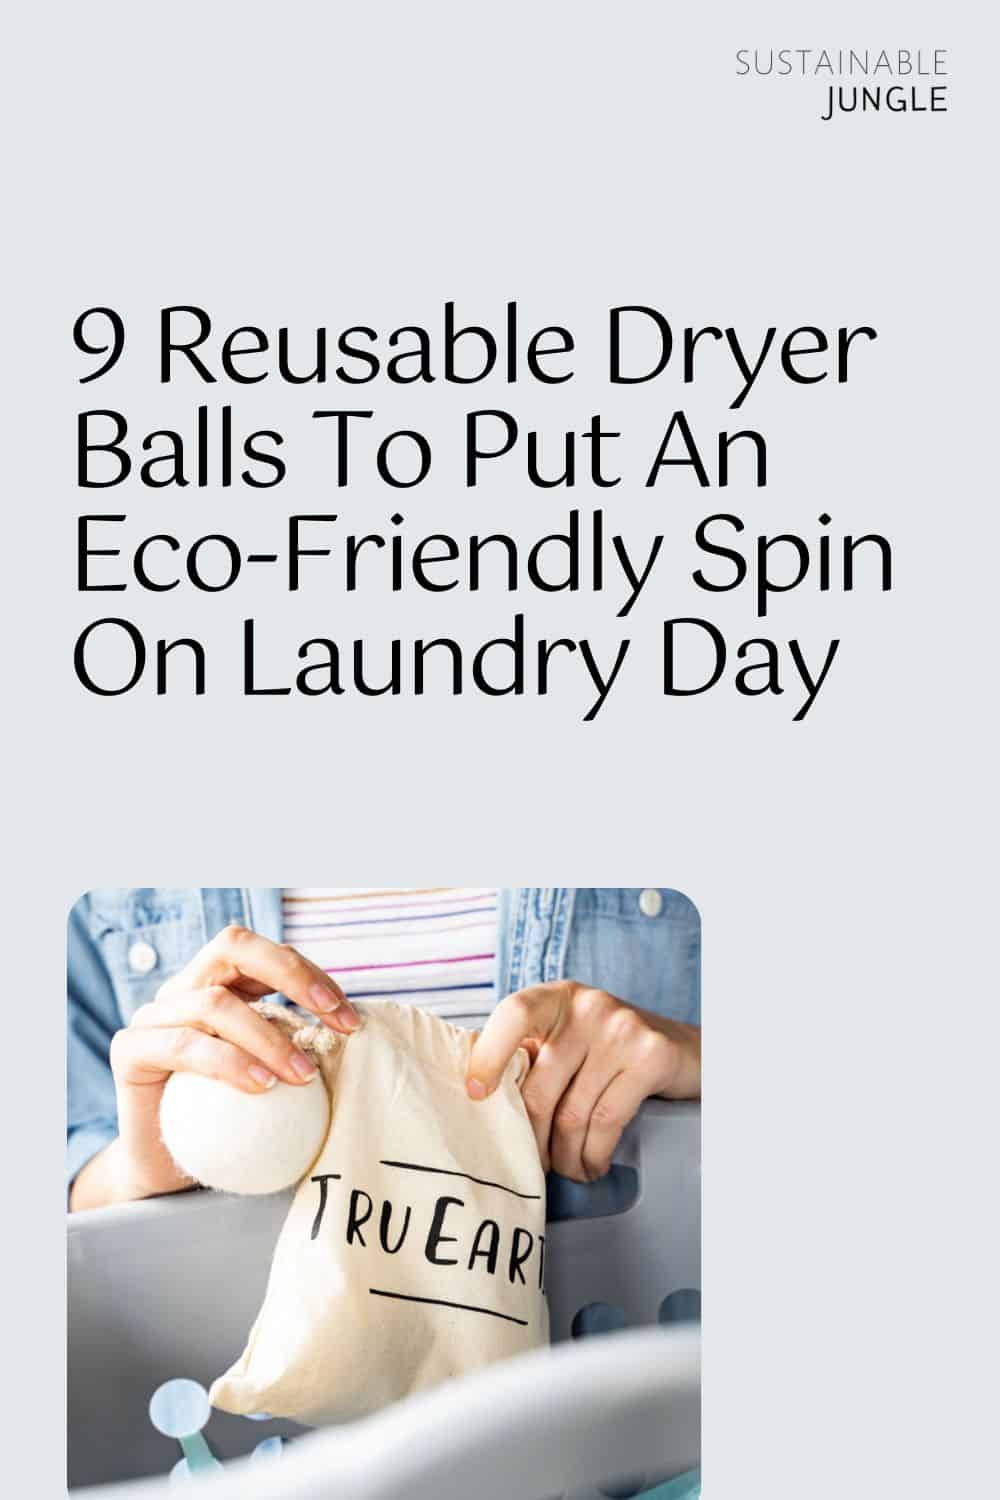 9 Reusable Dryer Balls To Put An Eco-Friendly Spin On Laundry Day Image by Tru Earth #dryerballs #resuabledryerballs #ecofriendlydryerballs #wooldryerballs #laundrydryerballs #ecofriendlywooldryerballs #dryerlintballs #sustainablejungle